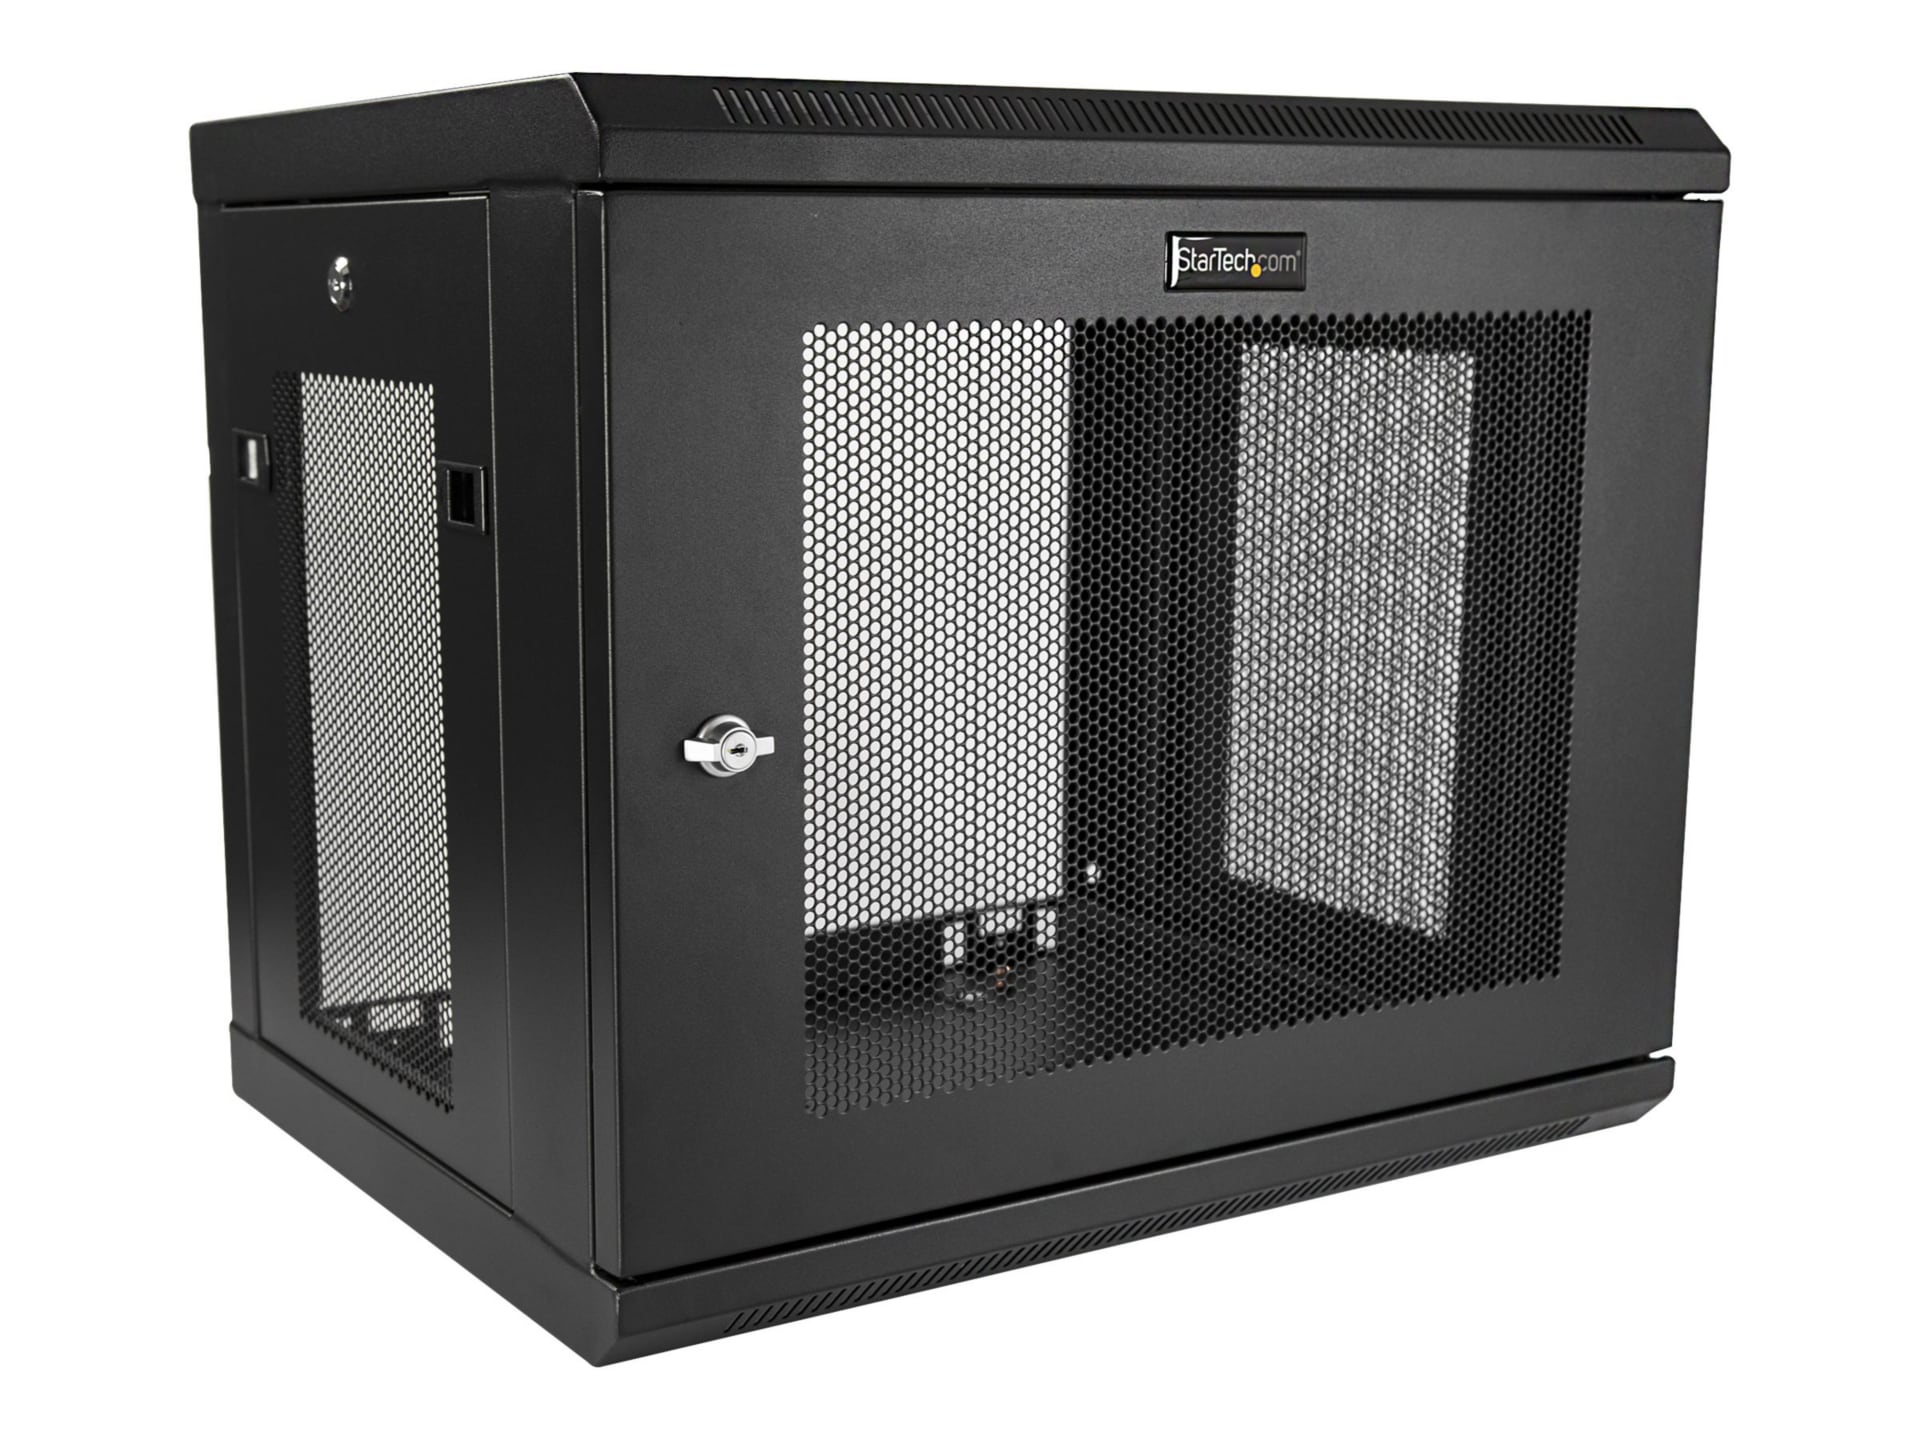 StarTech.com 2-Post 9U Wall Mount Network Cabinet, 19" Wall-Mounted Server Rack for Data / IT Equipment, Small Lockable